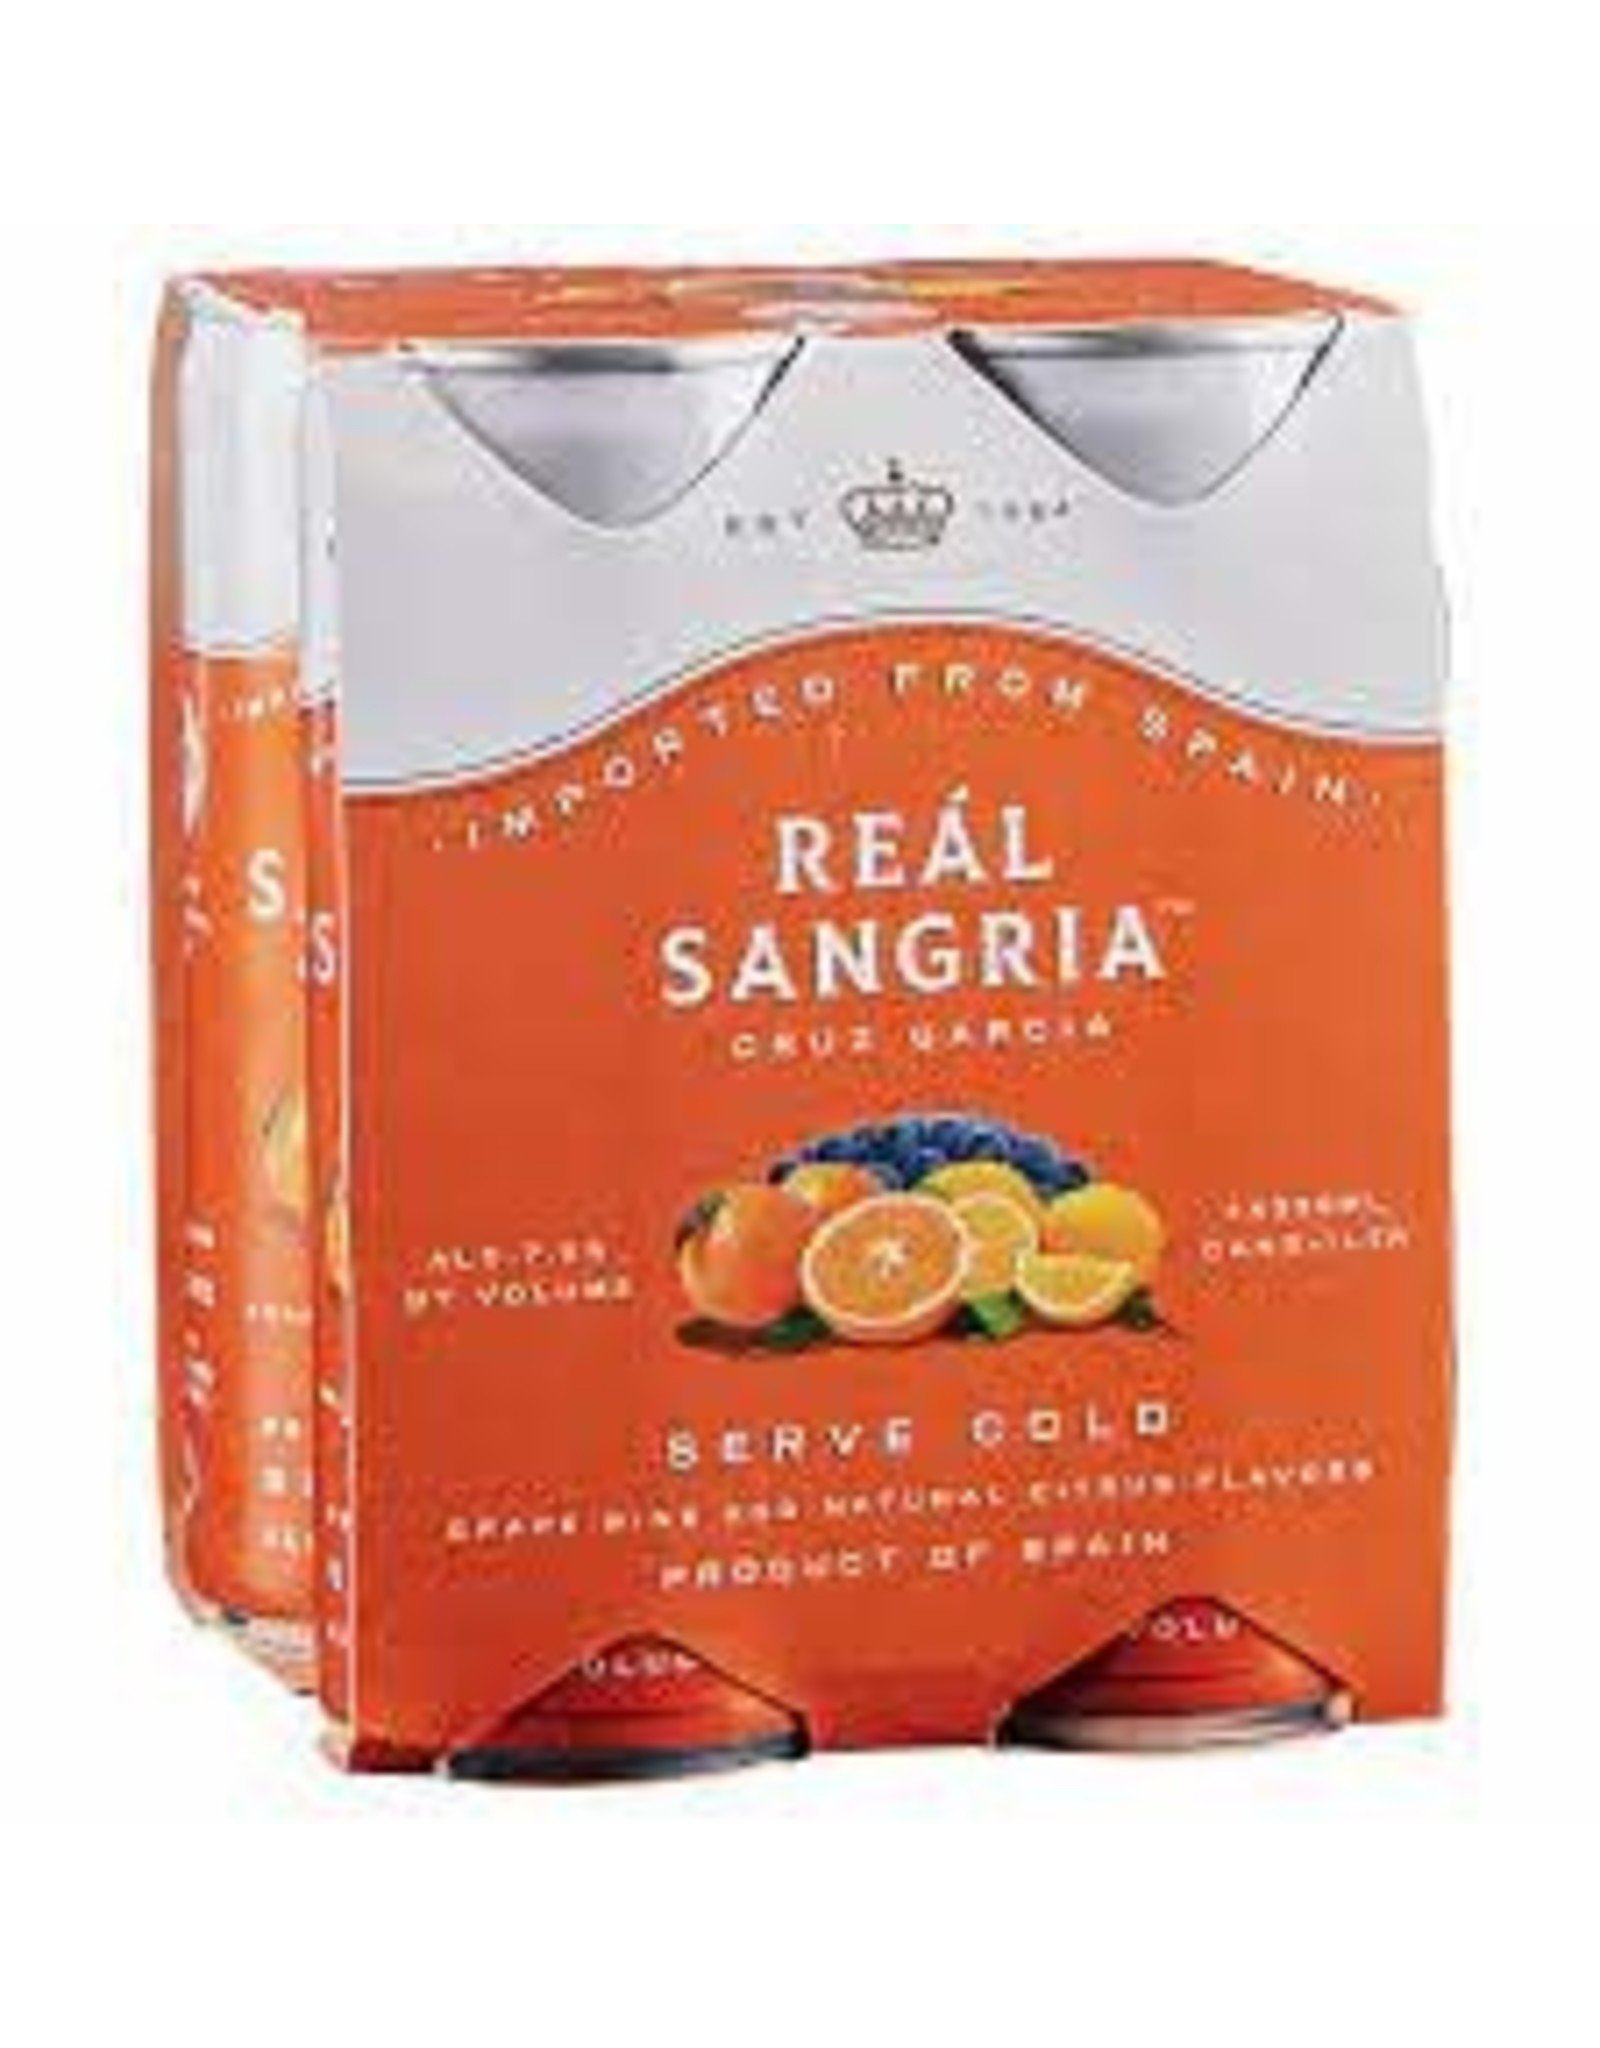 REAL SANGRIA 4 PK CANS